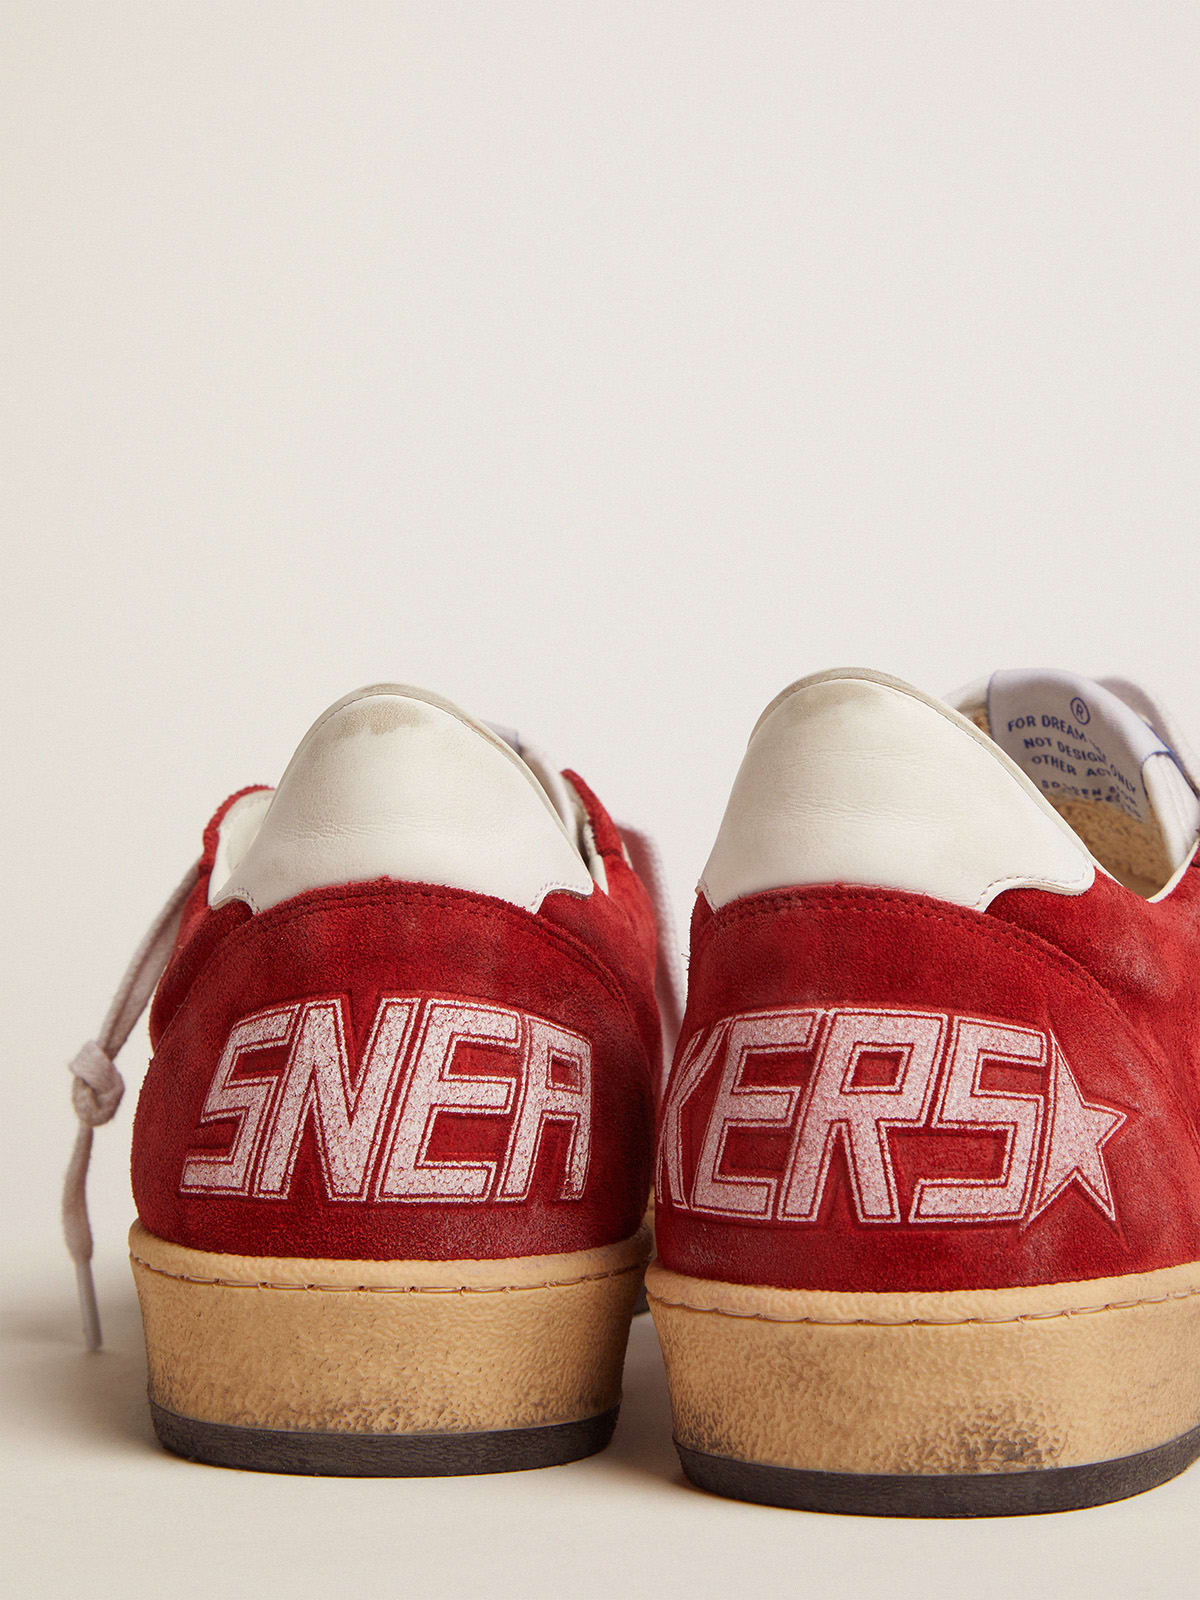 Golden Goose - Women’s Ball Star in red suede with white leather star in 